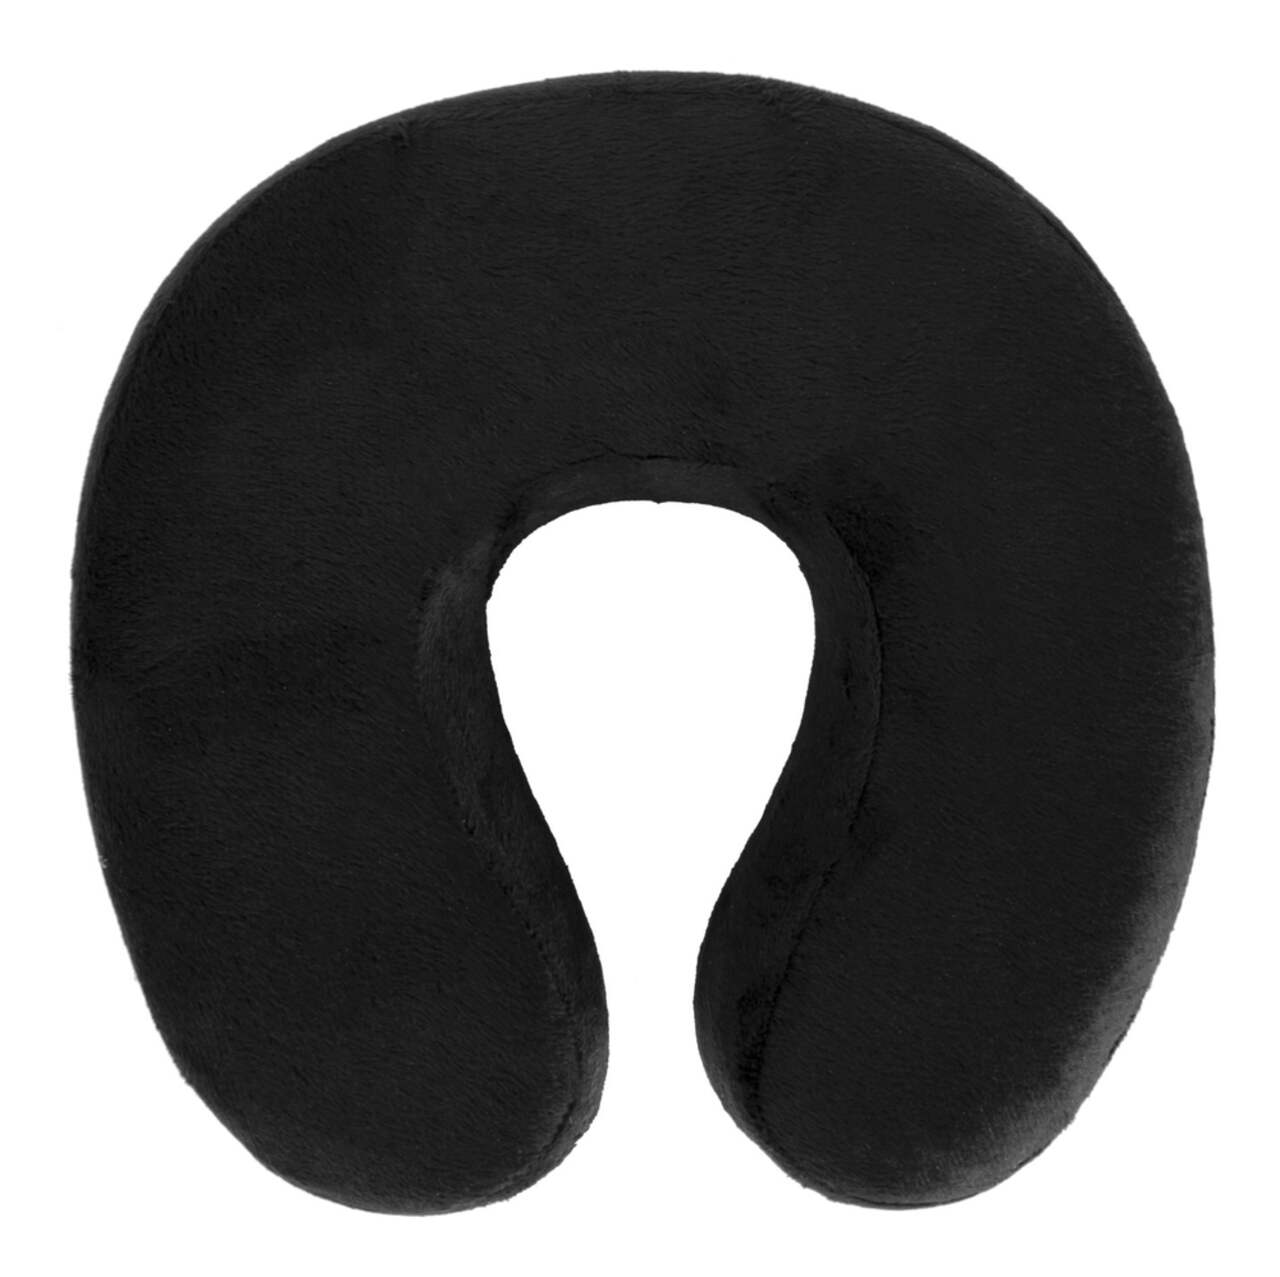 Maple Leaf Plush Memory Foam Head & Neck Support Travel Pillow For